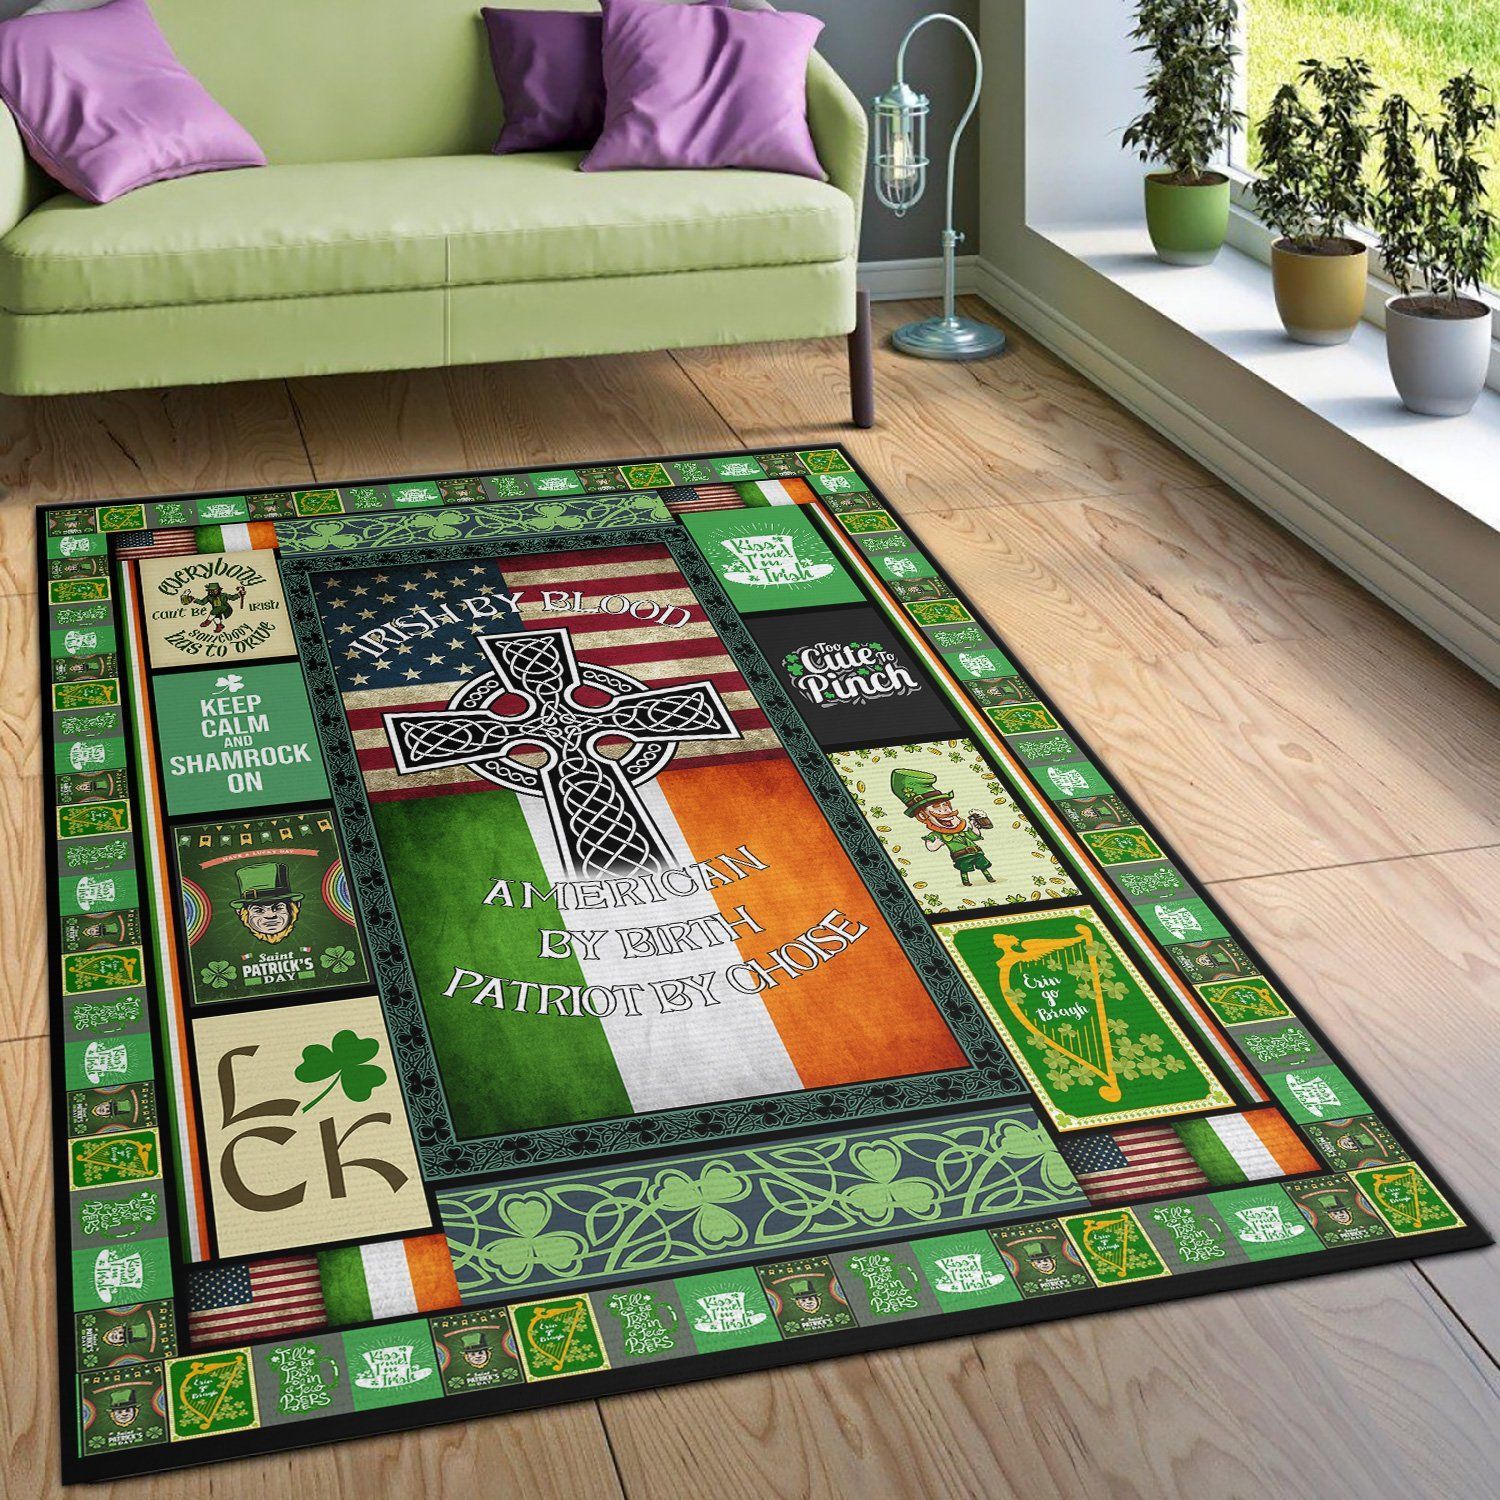 IRISH BY BLOOD AMERICAN BY BIRTH Area Rugs Living Room Carpet IR1401 Local Brands Floor Decor The US Decor - Indoor Outdoor Rugs 2